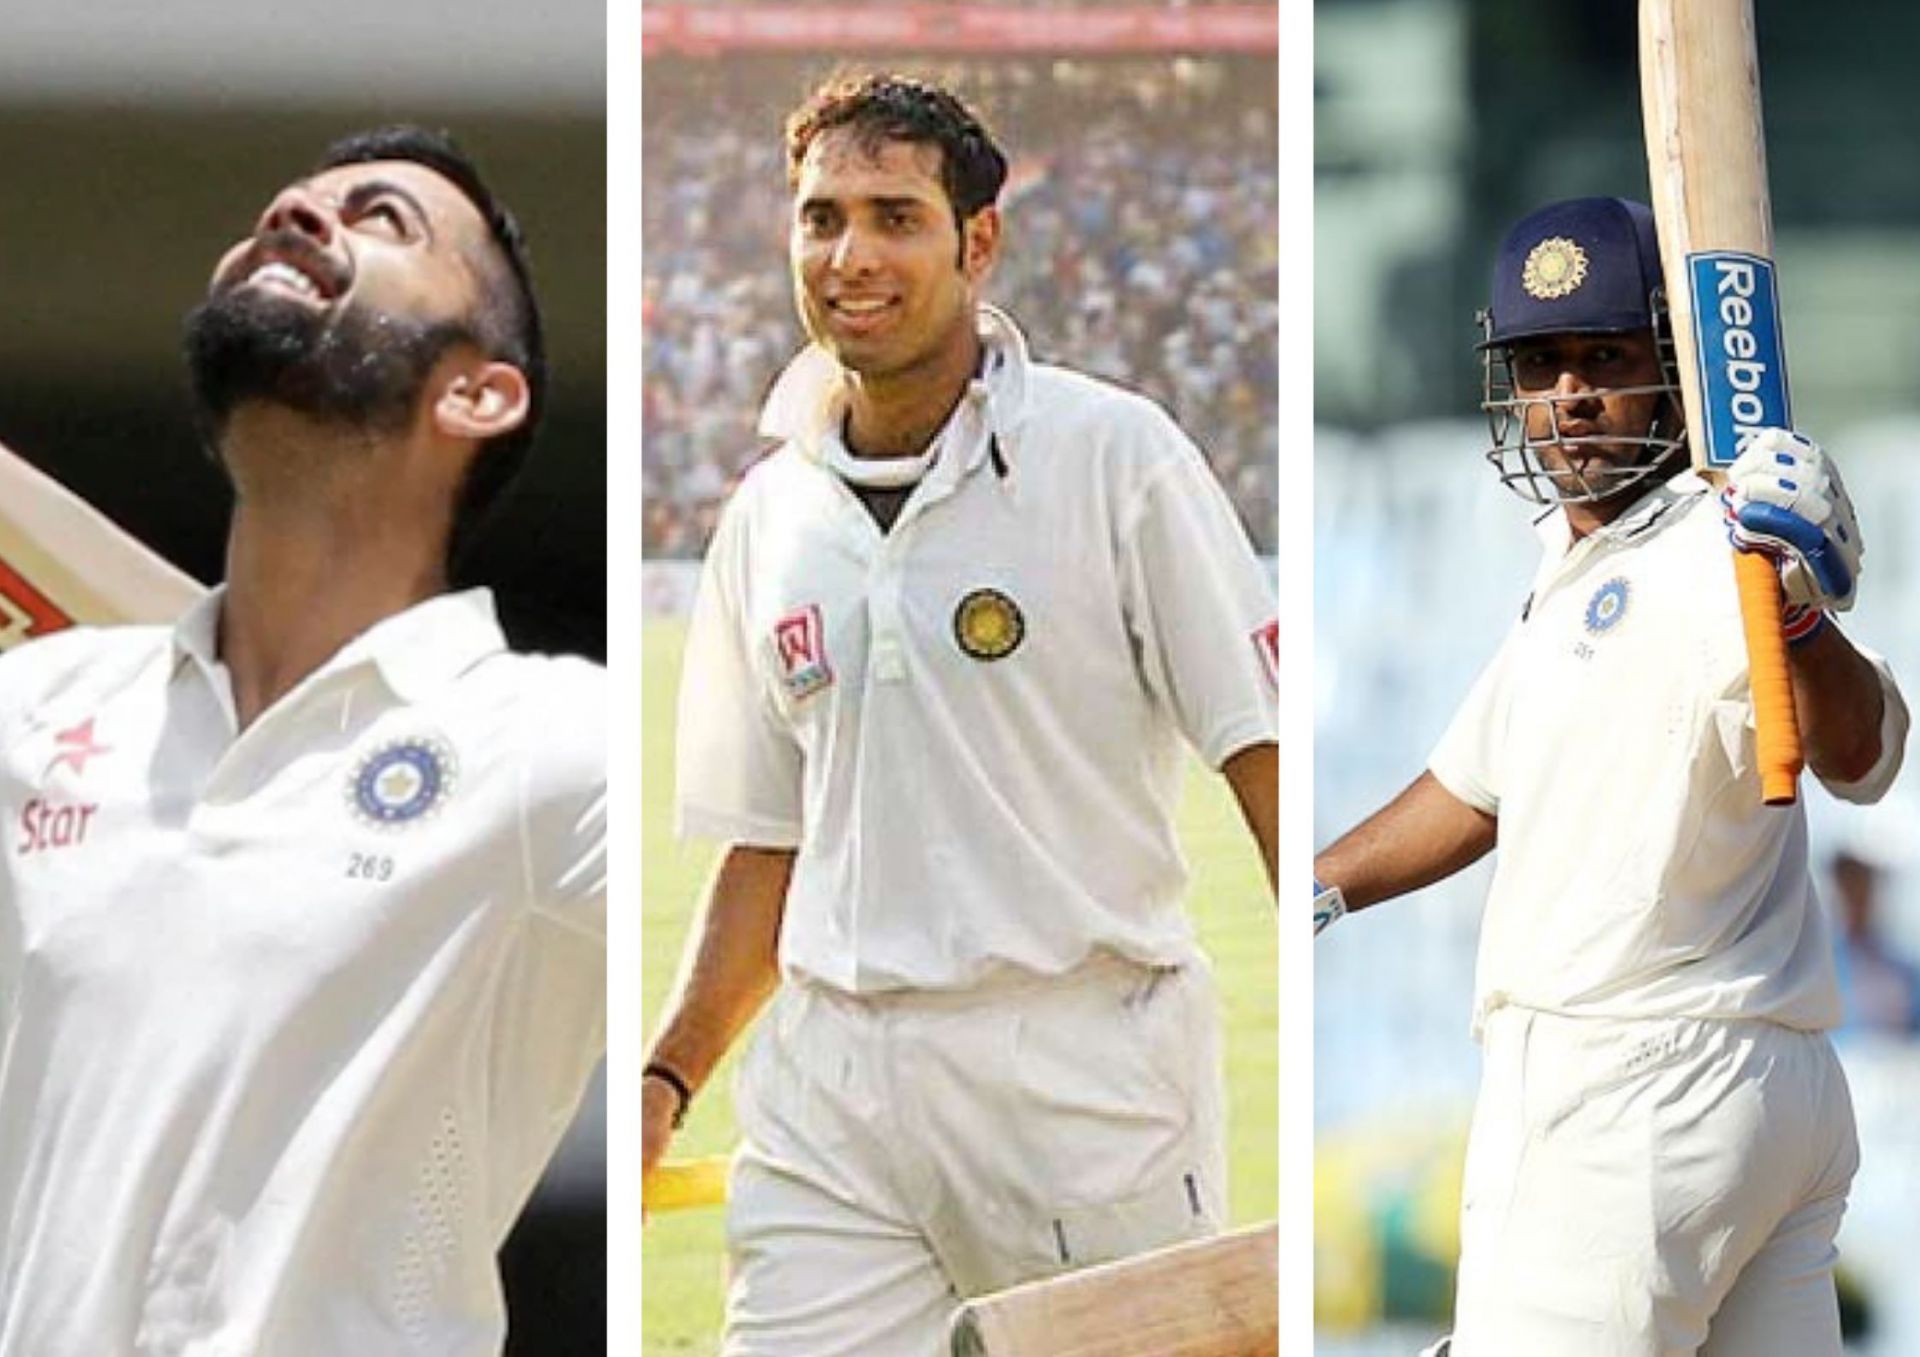 Virat Kohli, VVS Laxman and MS Dhoni boast of some of the most iconic double-hundreds among Indians (Picture Credits: PTI via Business Standard; PTI via DNA India; BCCI via Rediff).